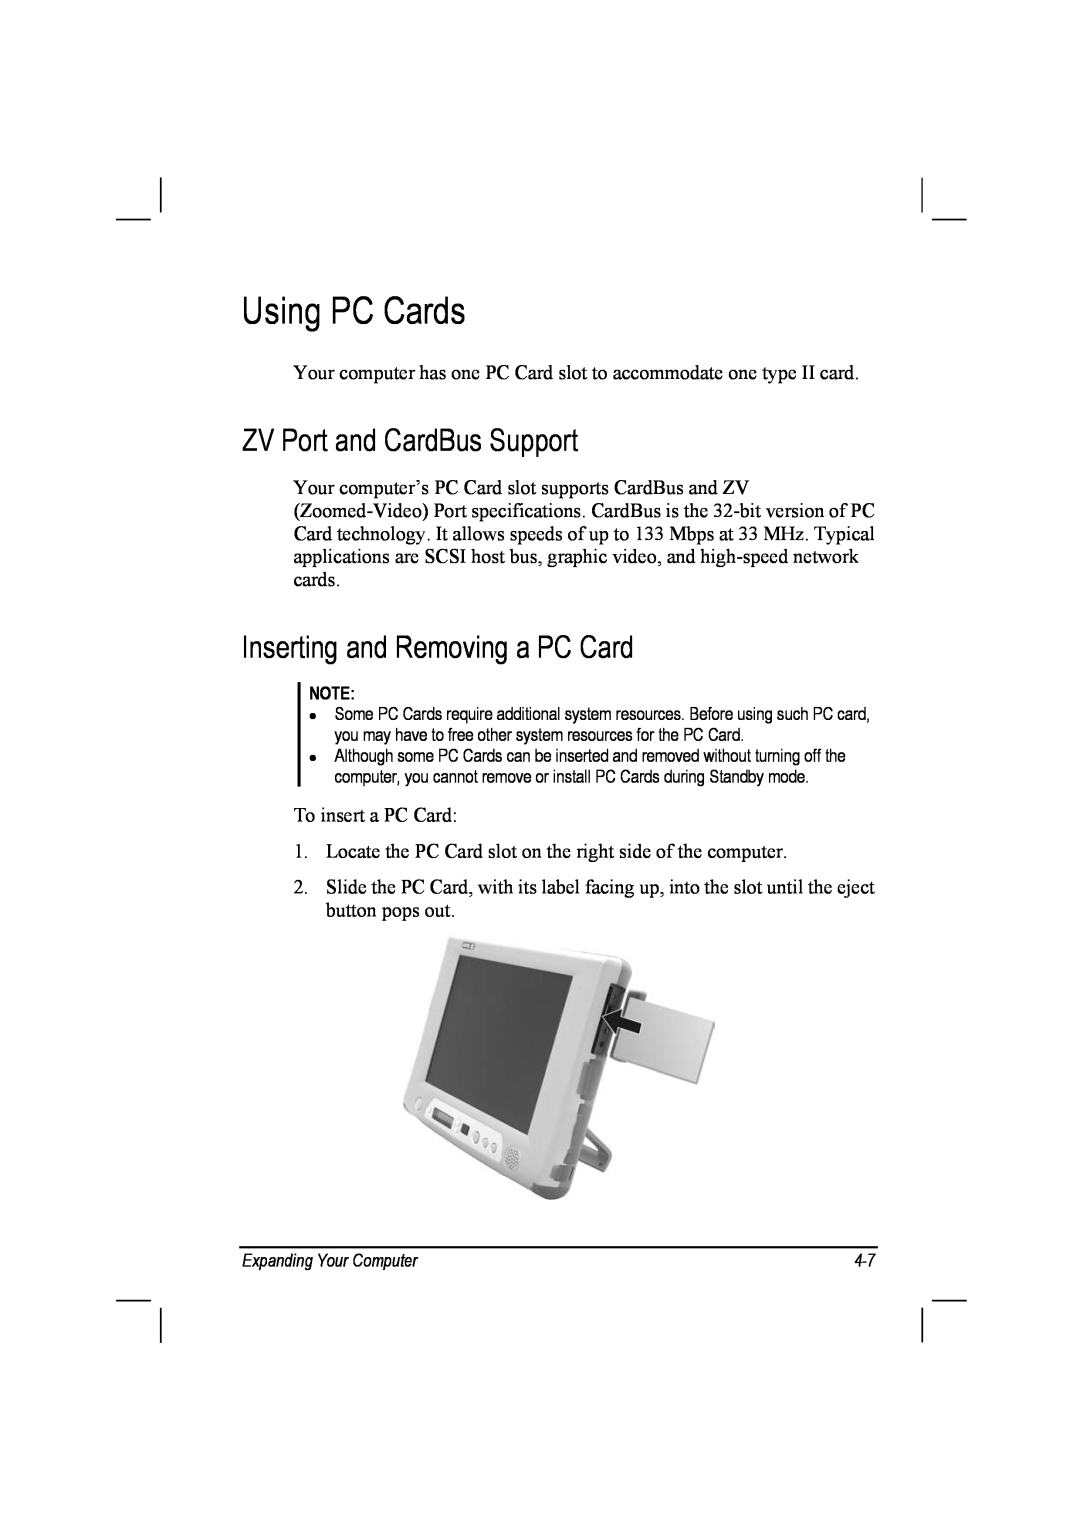 TAG 10 manual Using PC Cards, ZV Port and CardBus Support, Inserting and Removing a PC Card 